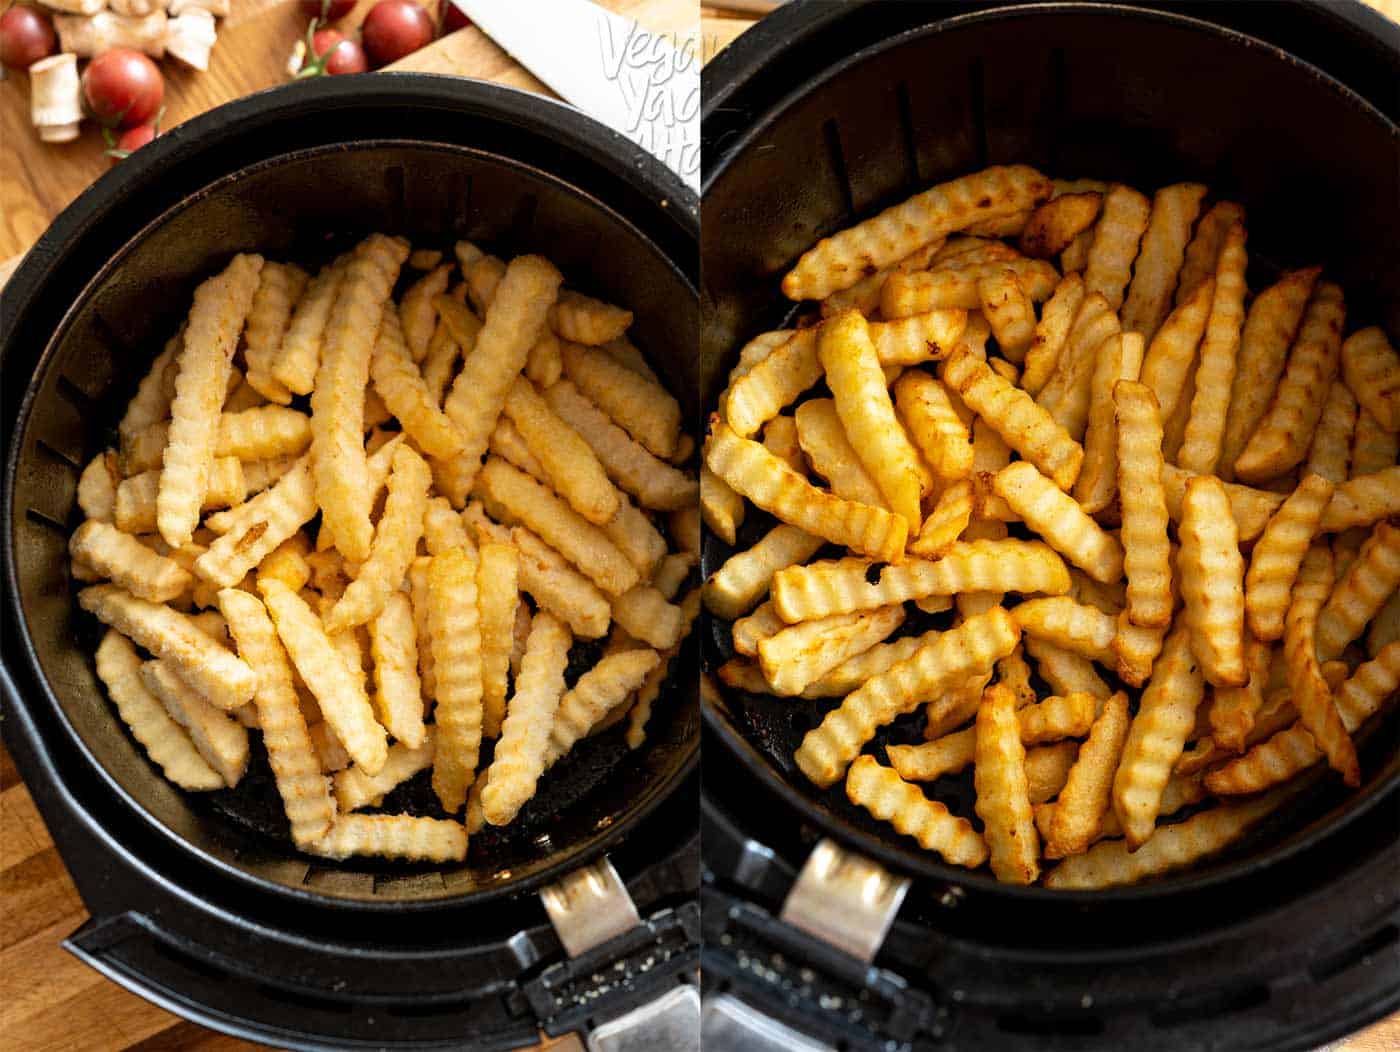 before and after photos of Air-fried frozen crinkle cut fries